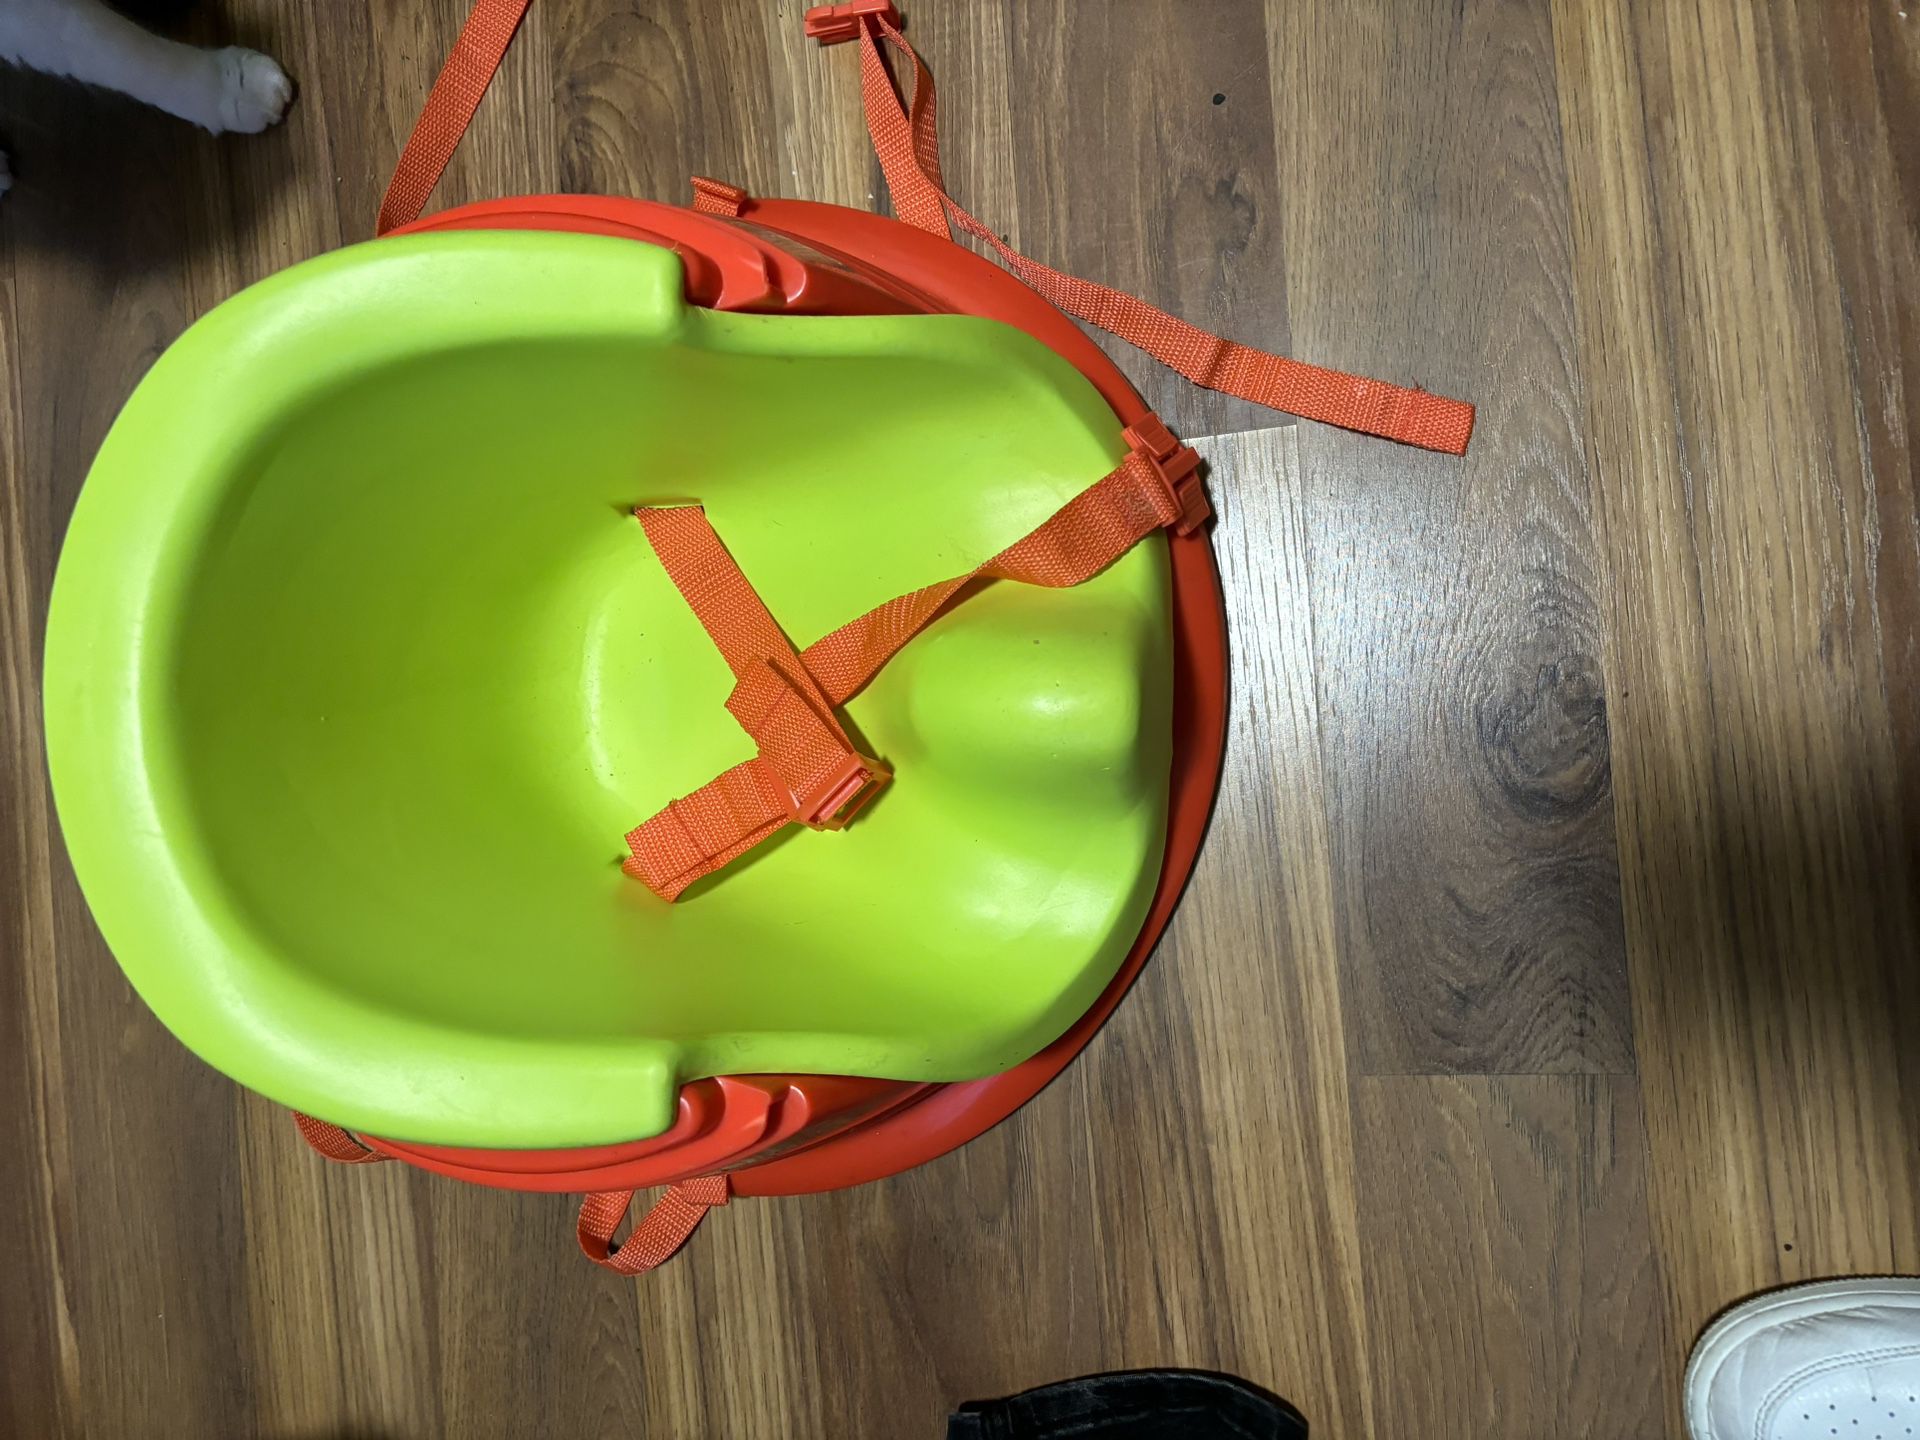 Toddlers Booster Seat